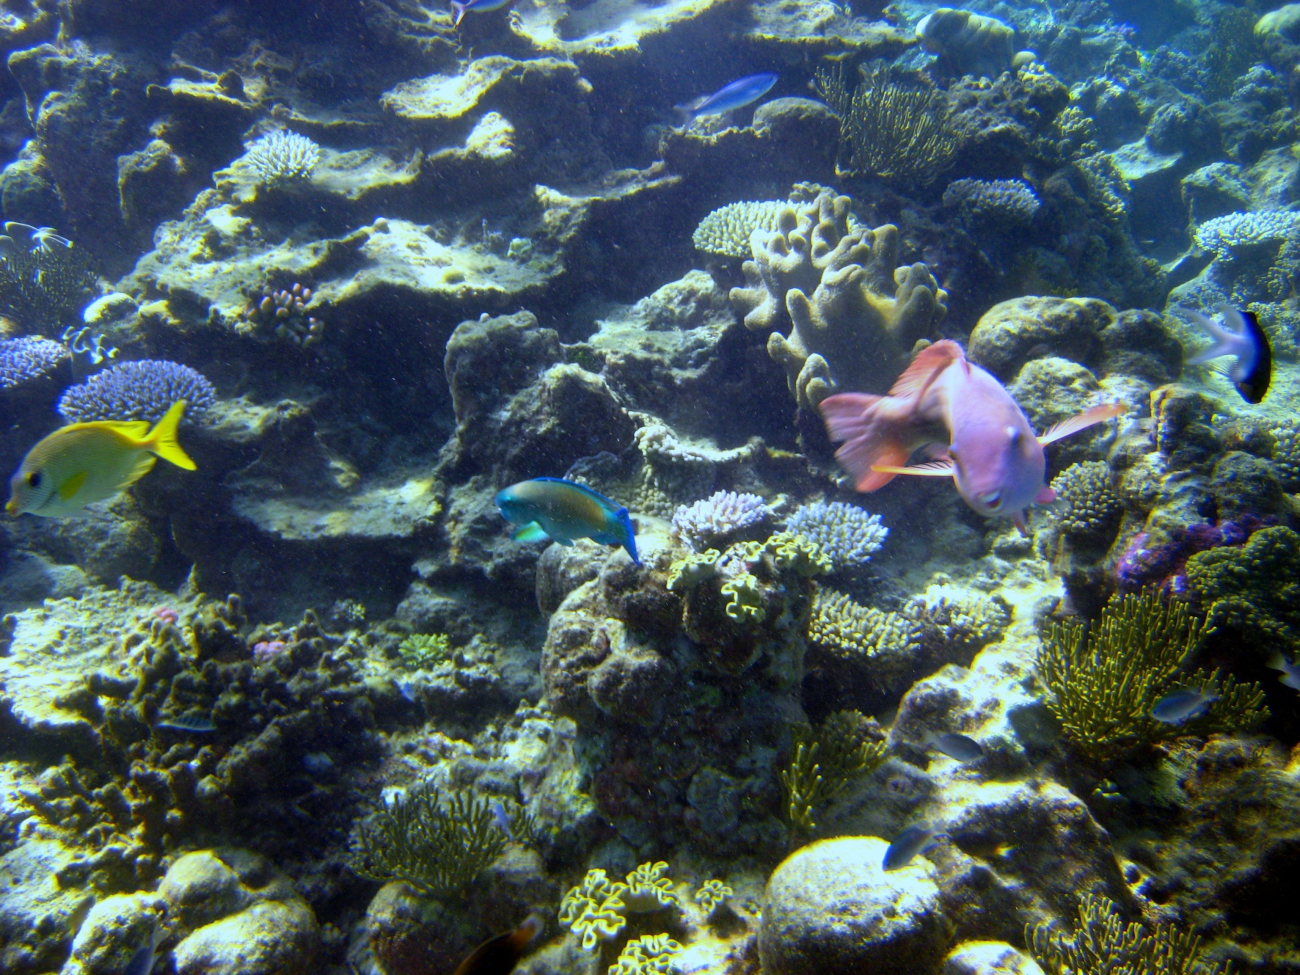 A variety of fish in a reef scene